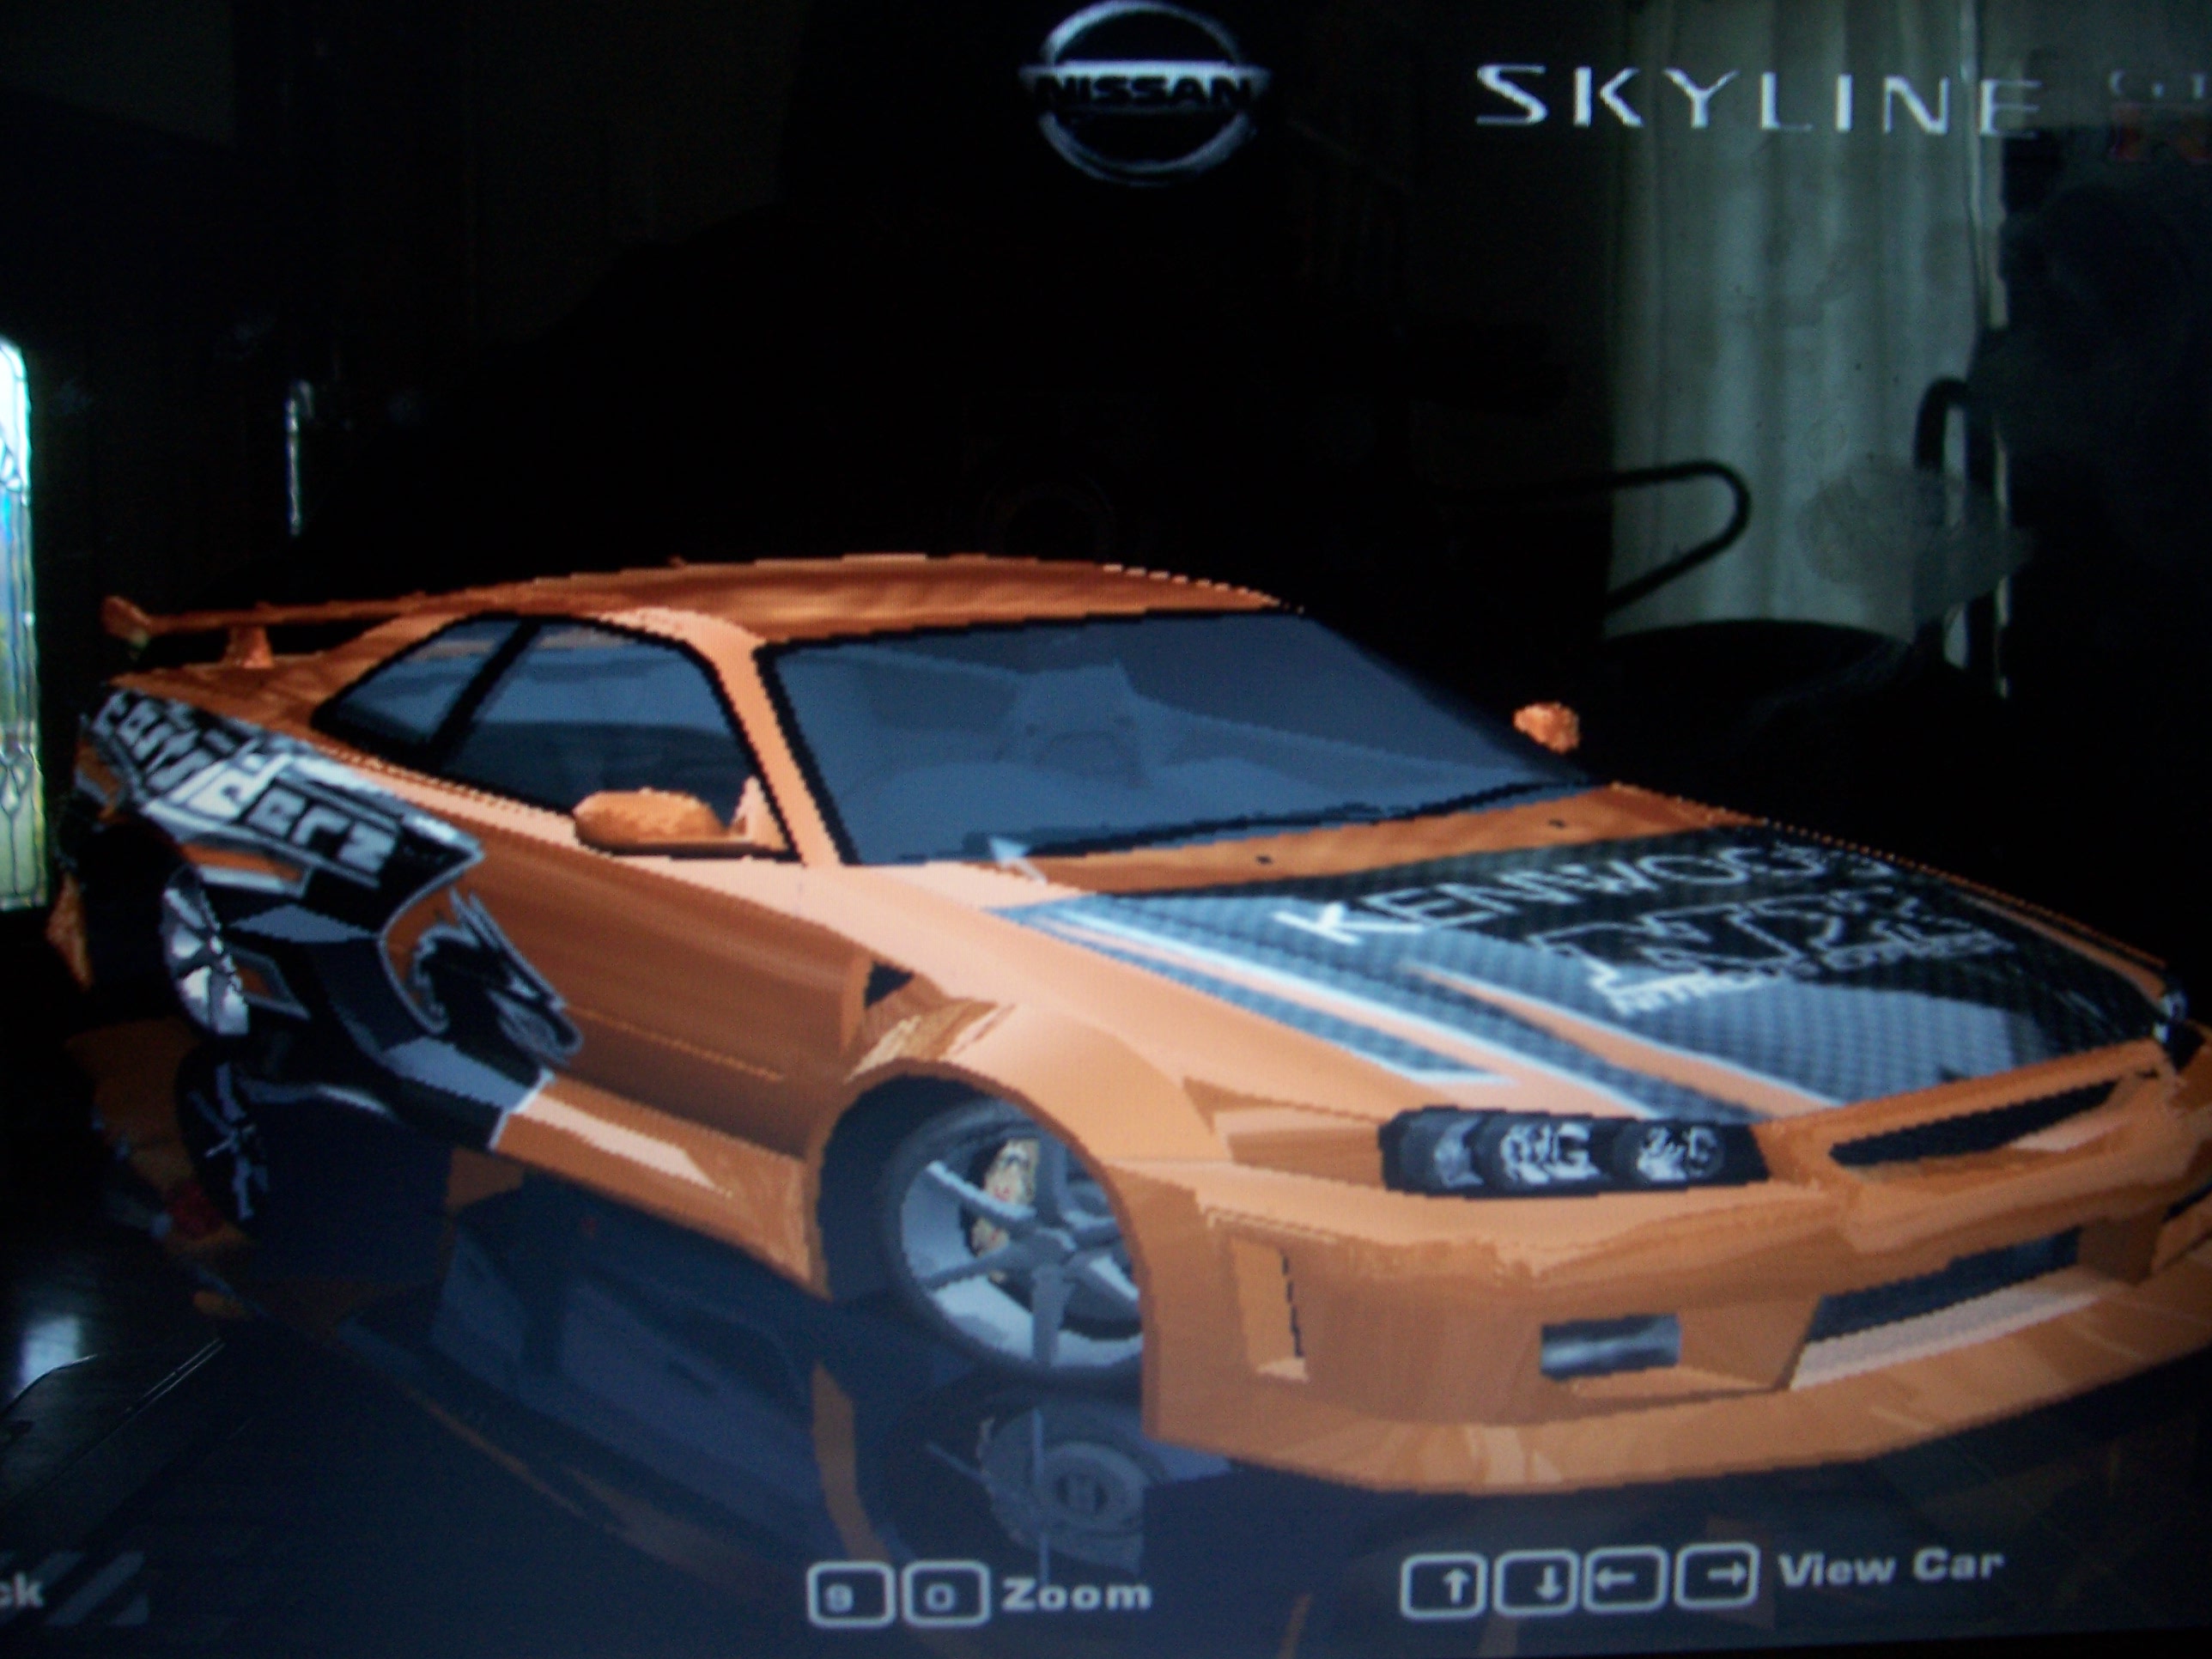 Need For Speed Most Wanted Nissan Skyline GT-R Eddie Vinyl from NFSU